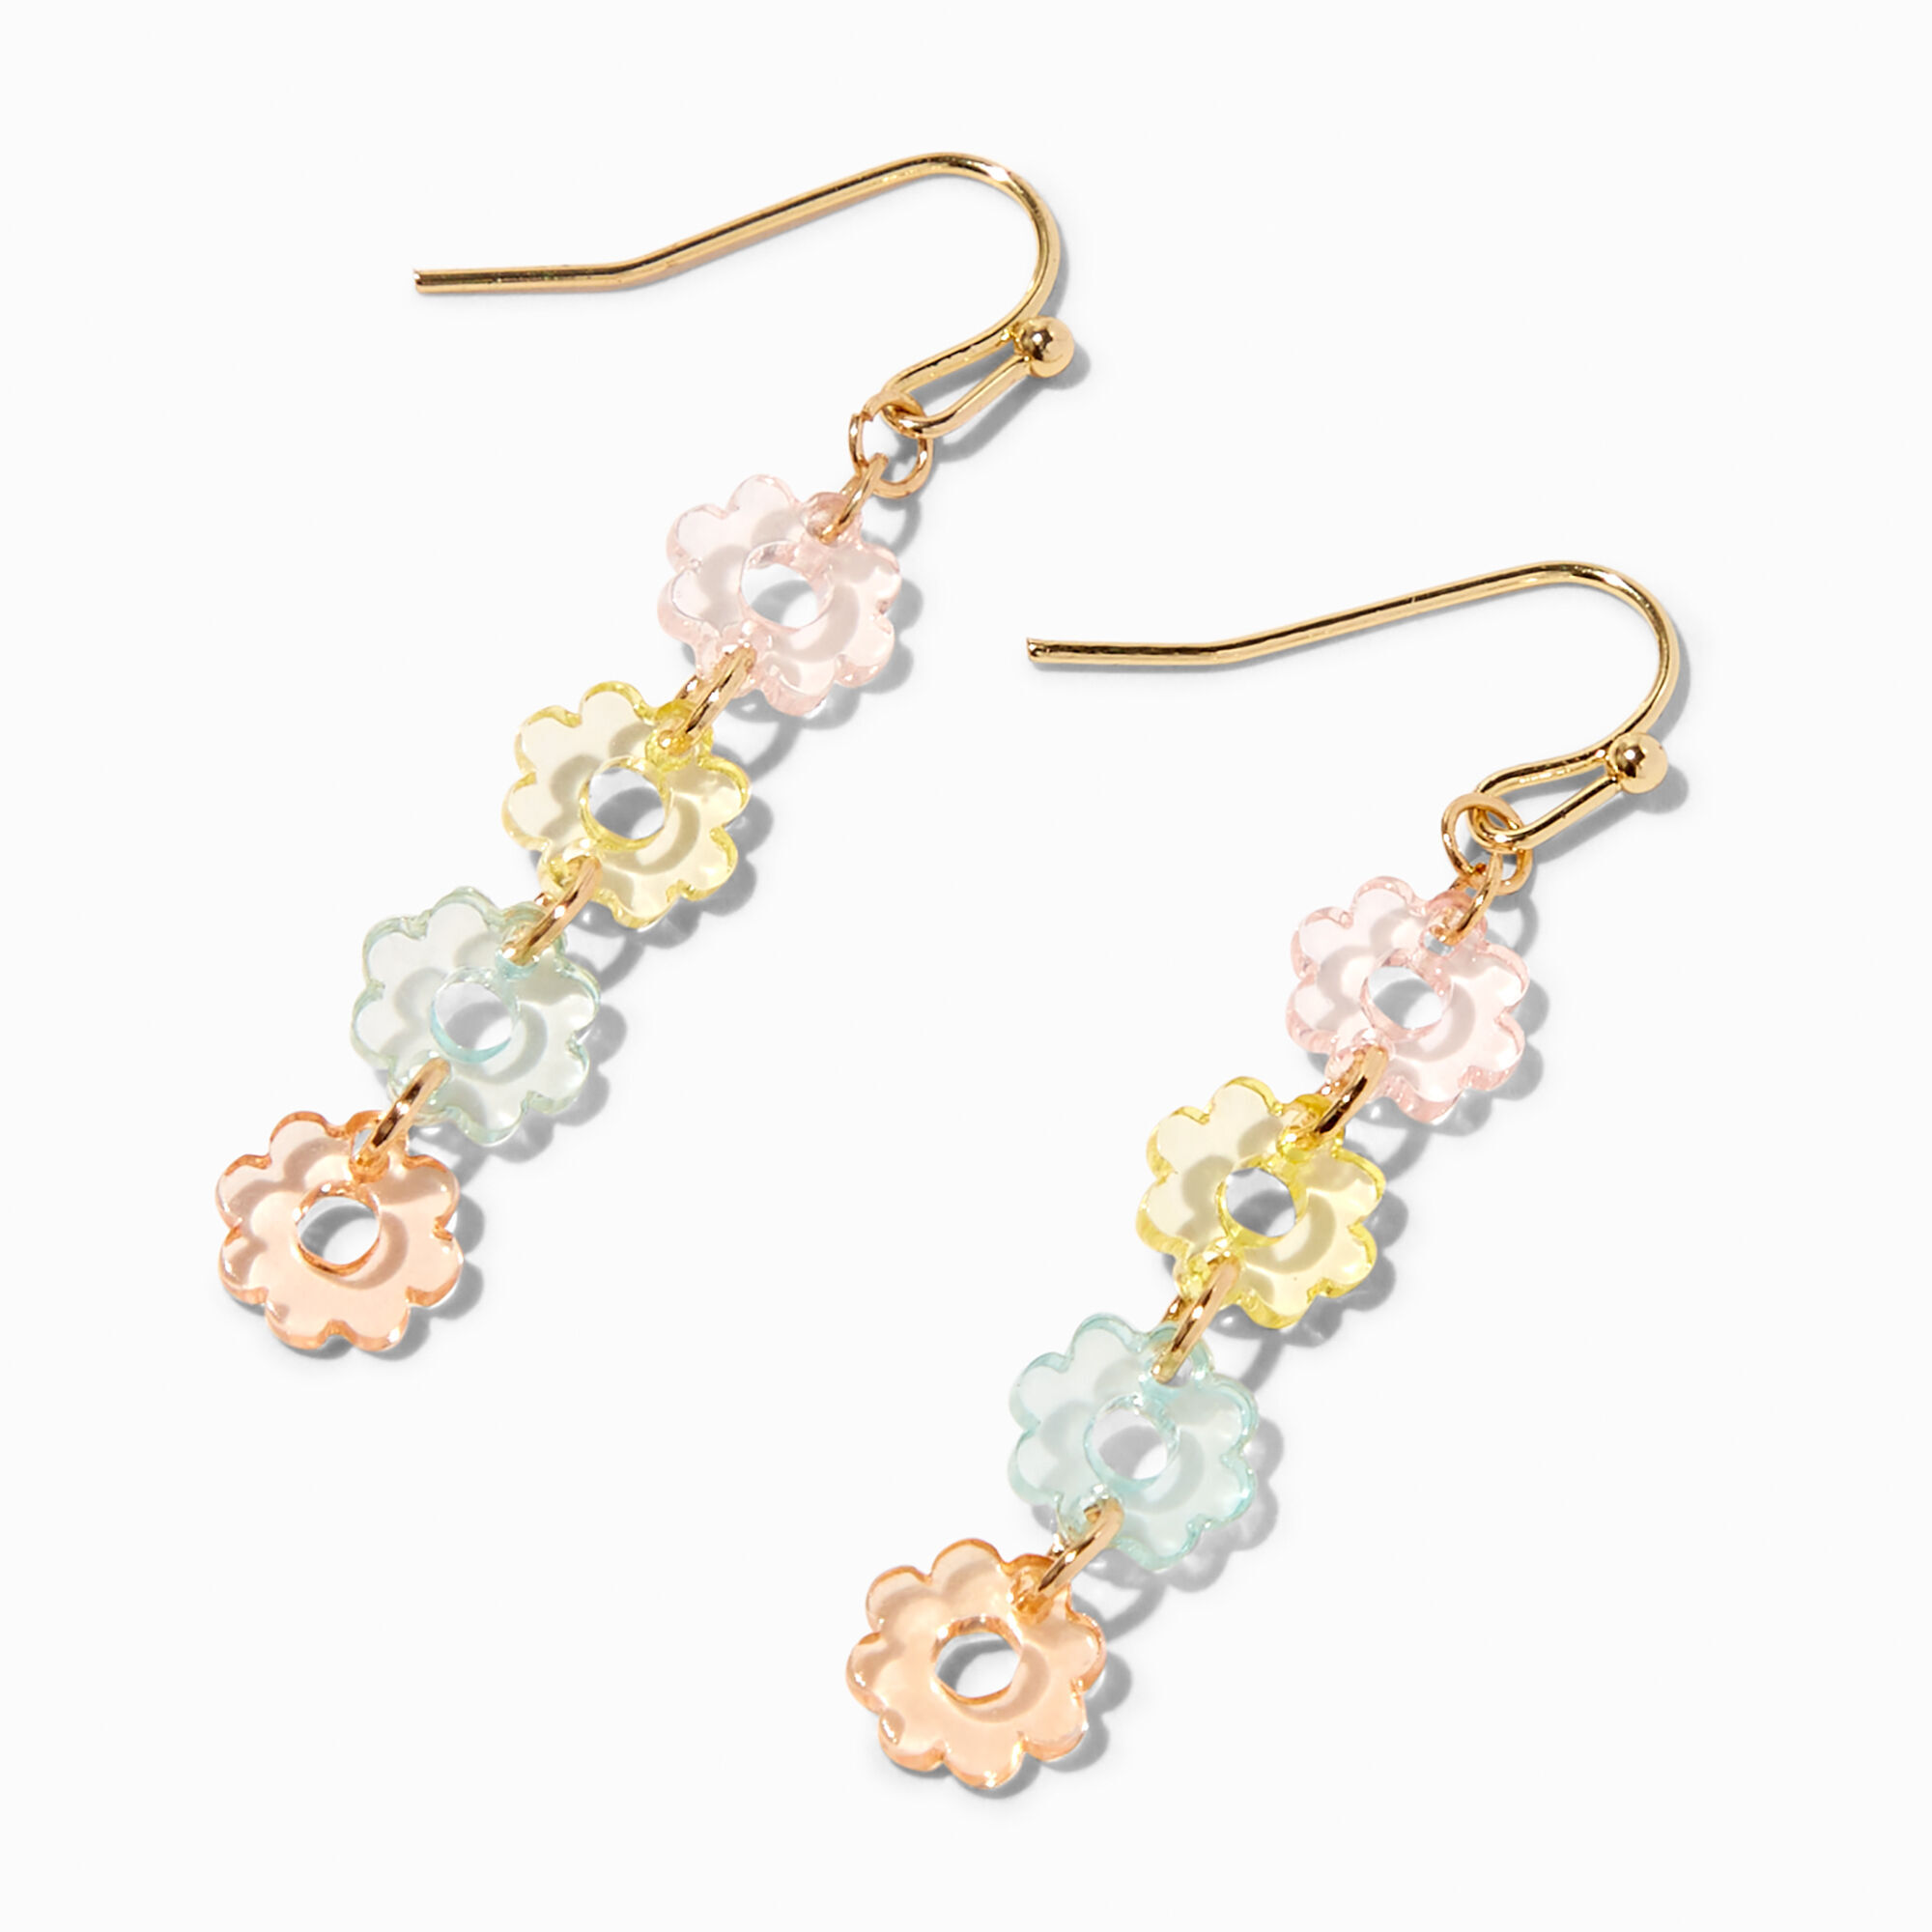 View Claires Tone 15 Daisy Drop Earrings Gold information